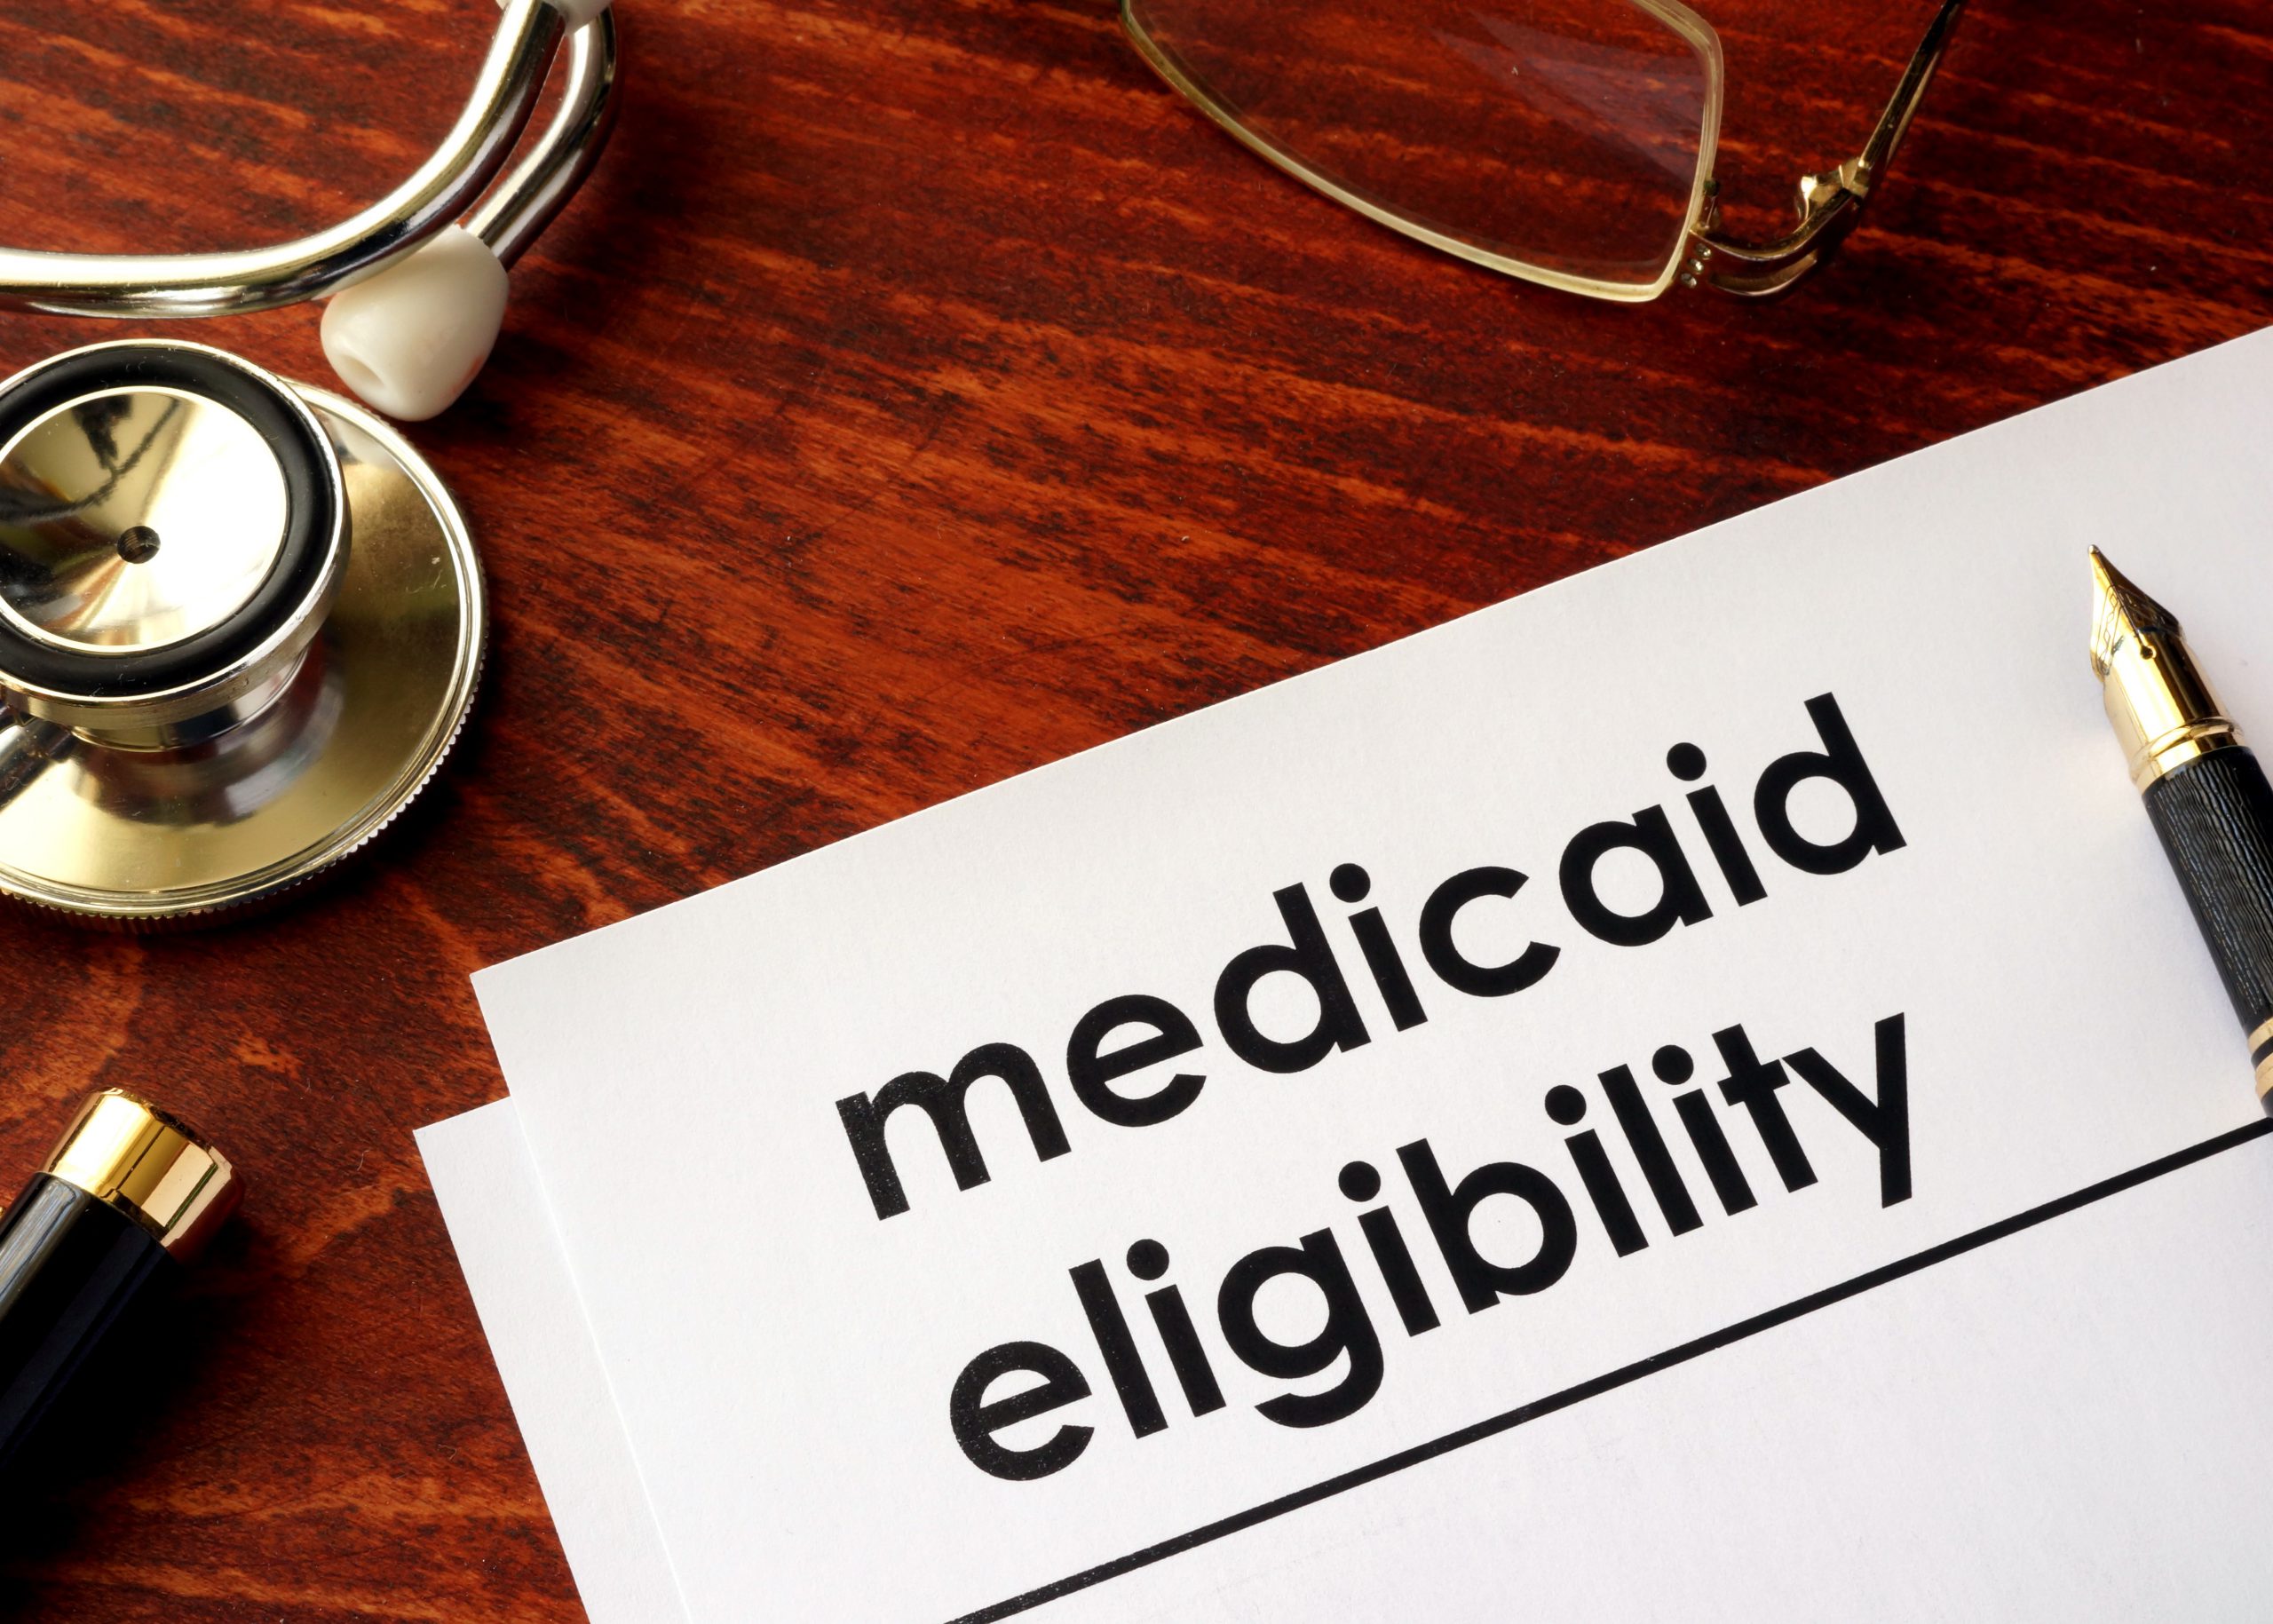 MEDICAID ELIGIBILITY WORK REQUIREMENTS SYRTIS SOLUTIONS